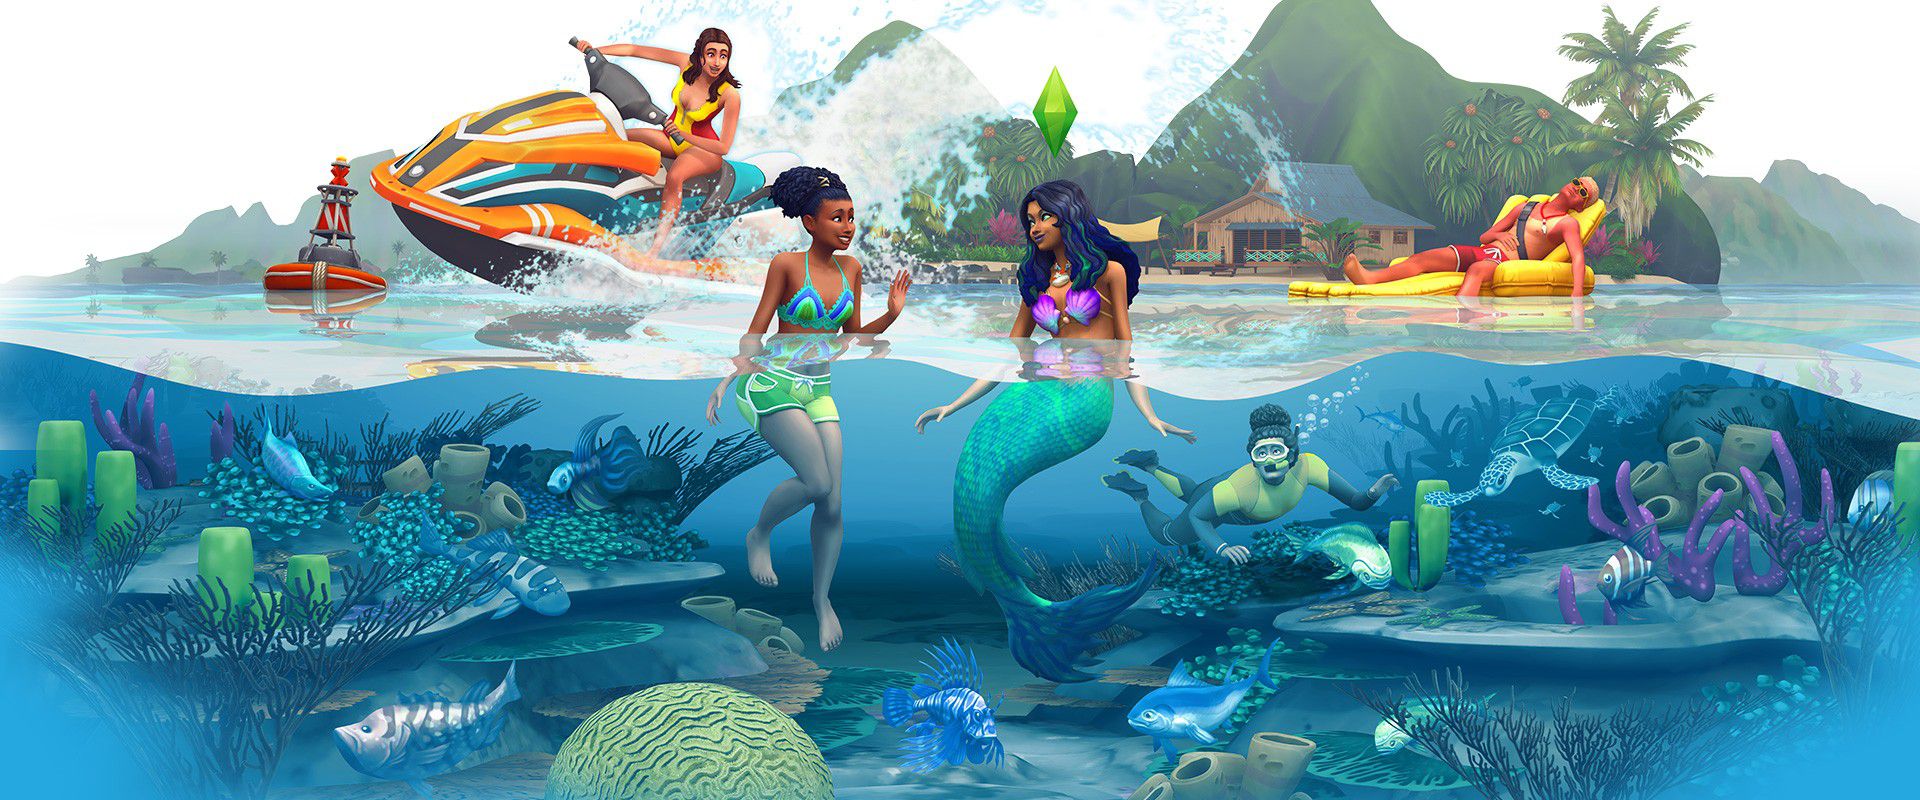 sims 4 all expansion packs download free